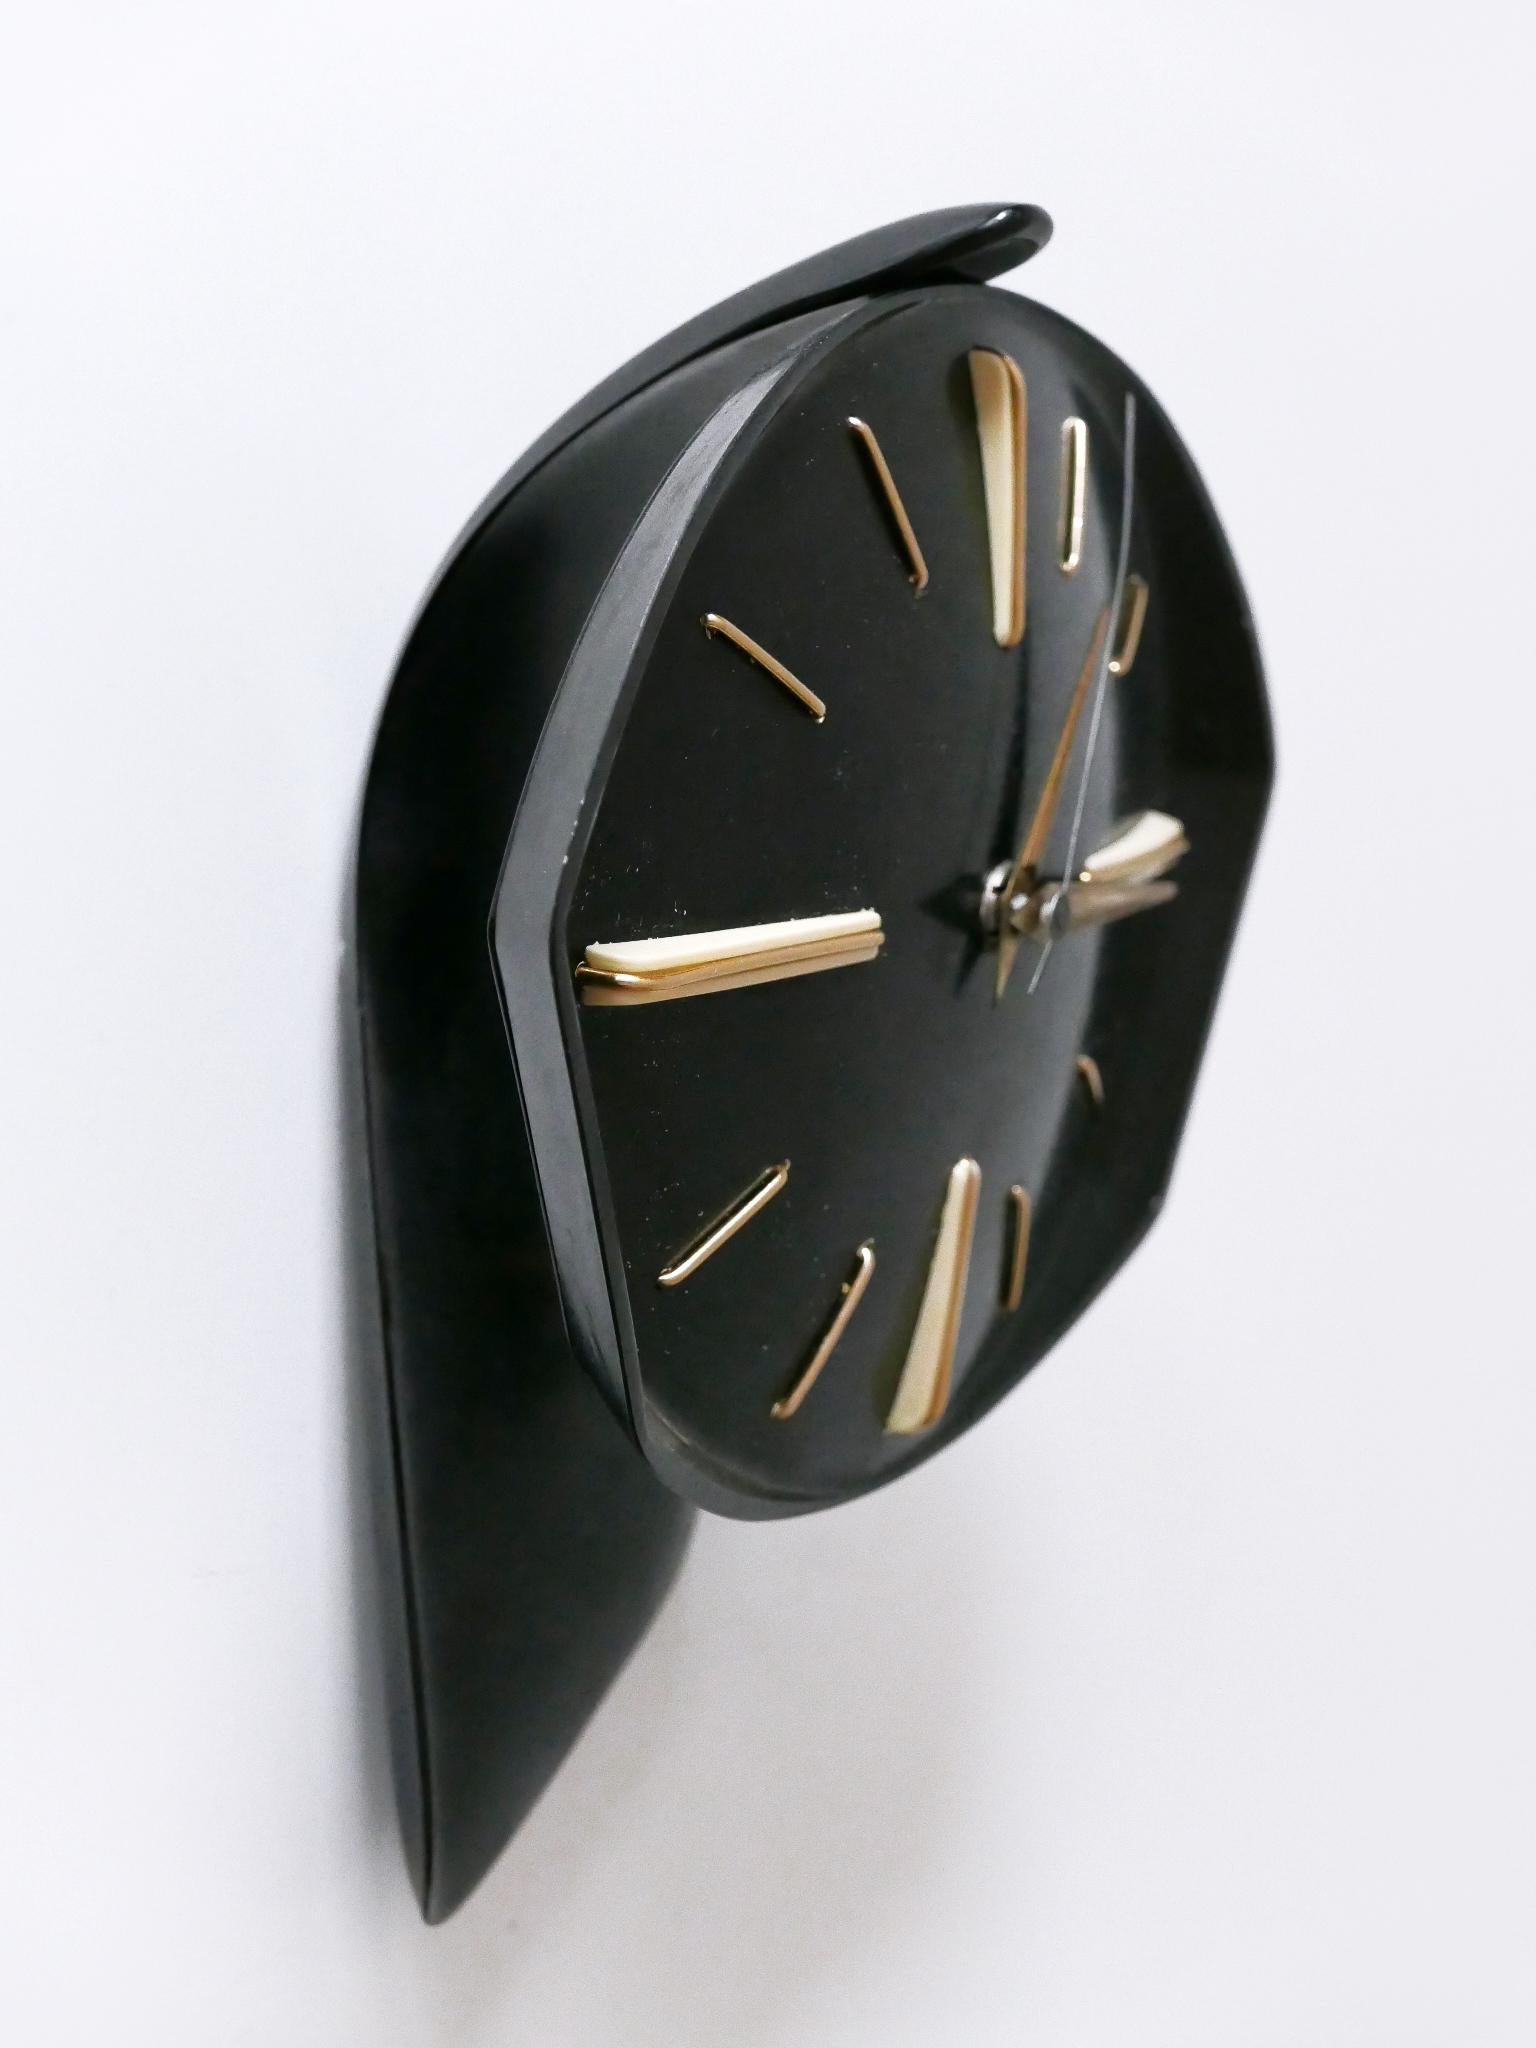 Brass Rare and Lovely Mid-Century Modern Bakelite Table or Wall Clock by PRIM 1950s For Sale